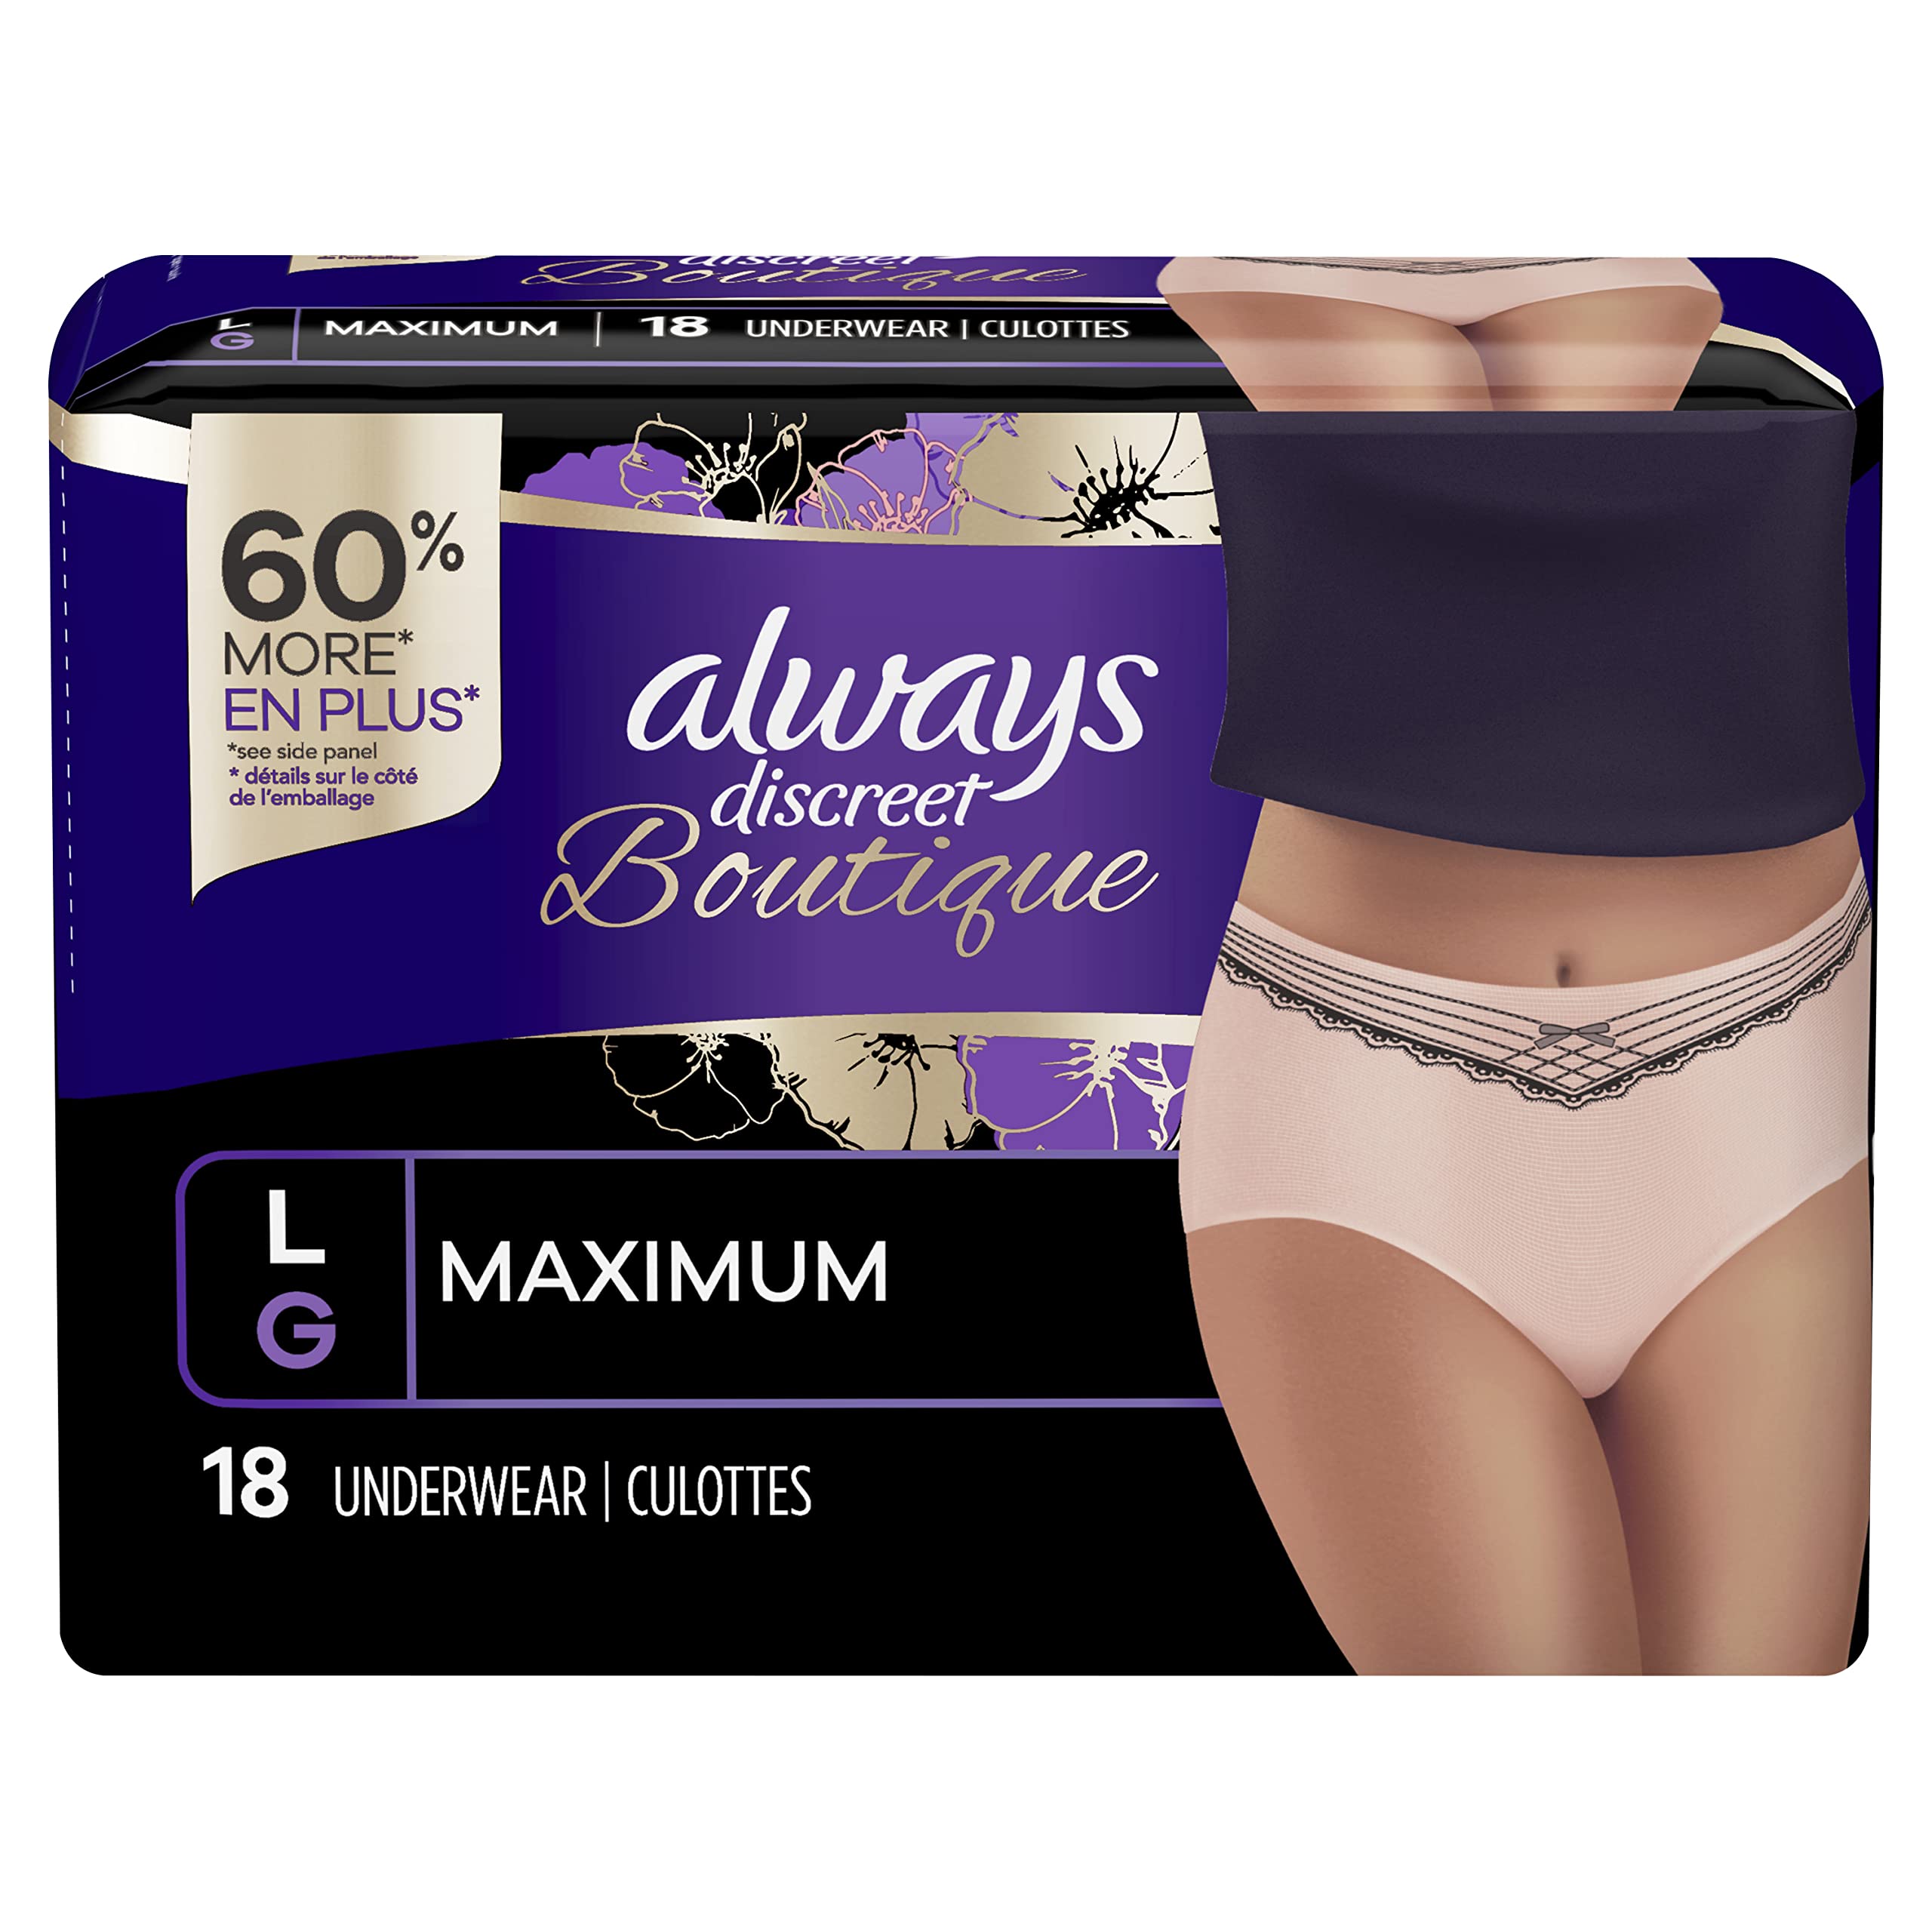 10 Count 1 Package Large, Always Discreet Boutique India